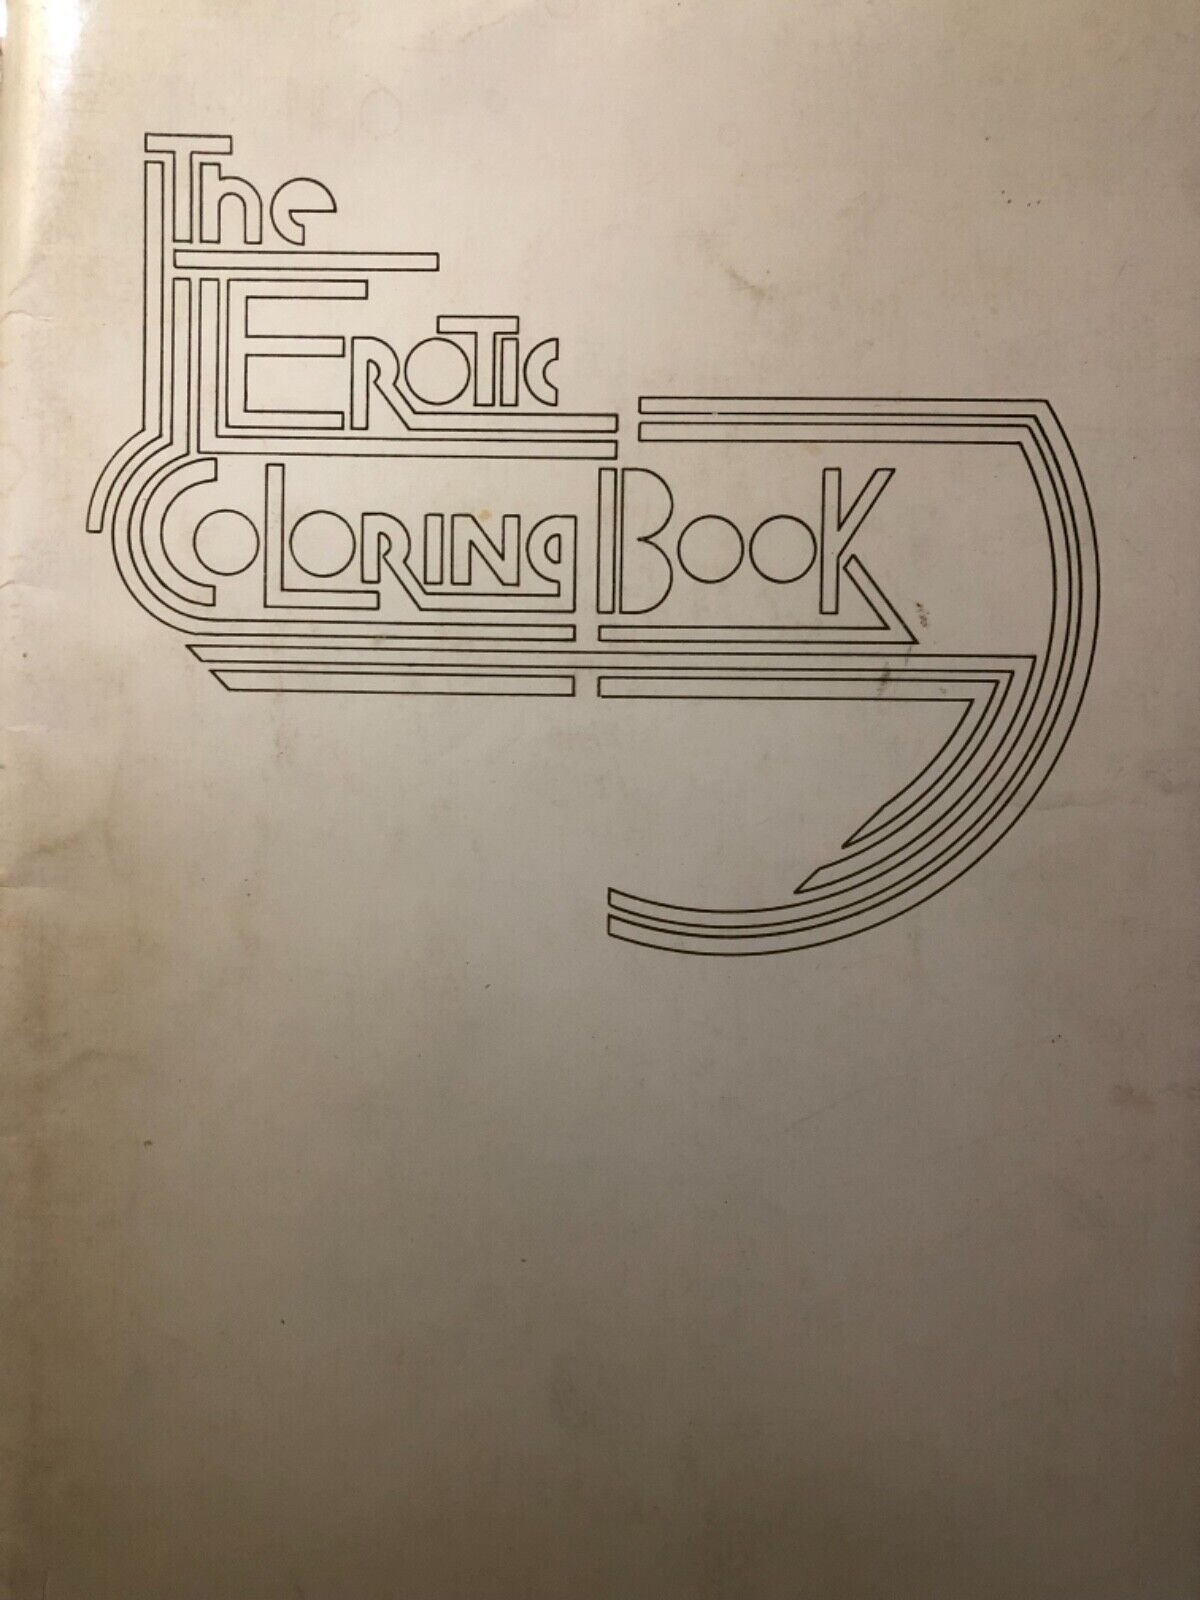 RARE : The Erotic Coloring Book - 1975 illustrated by Craig Berlin 